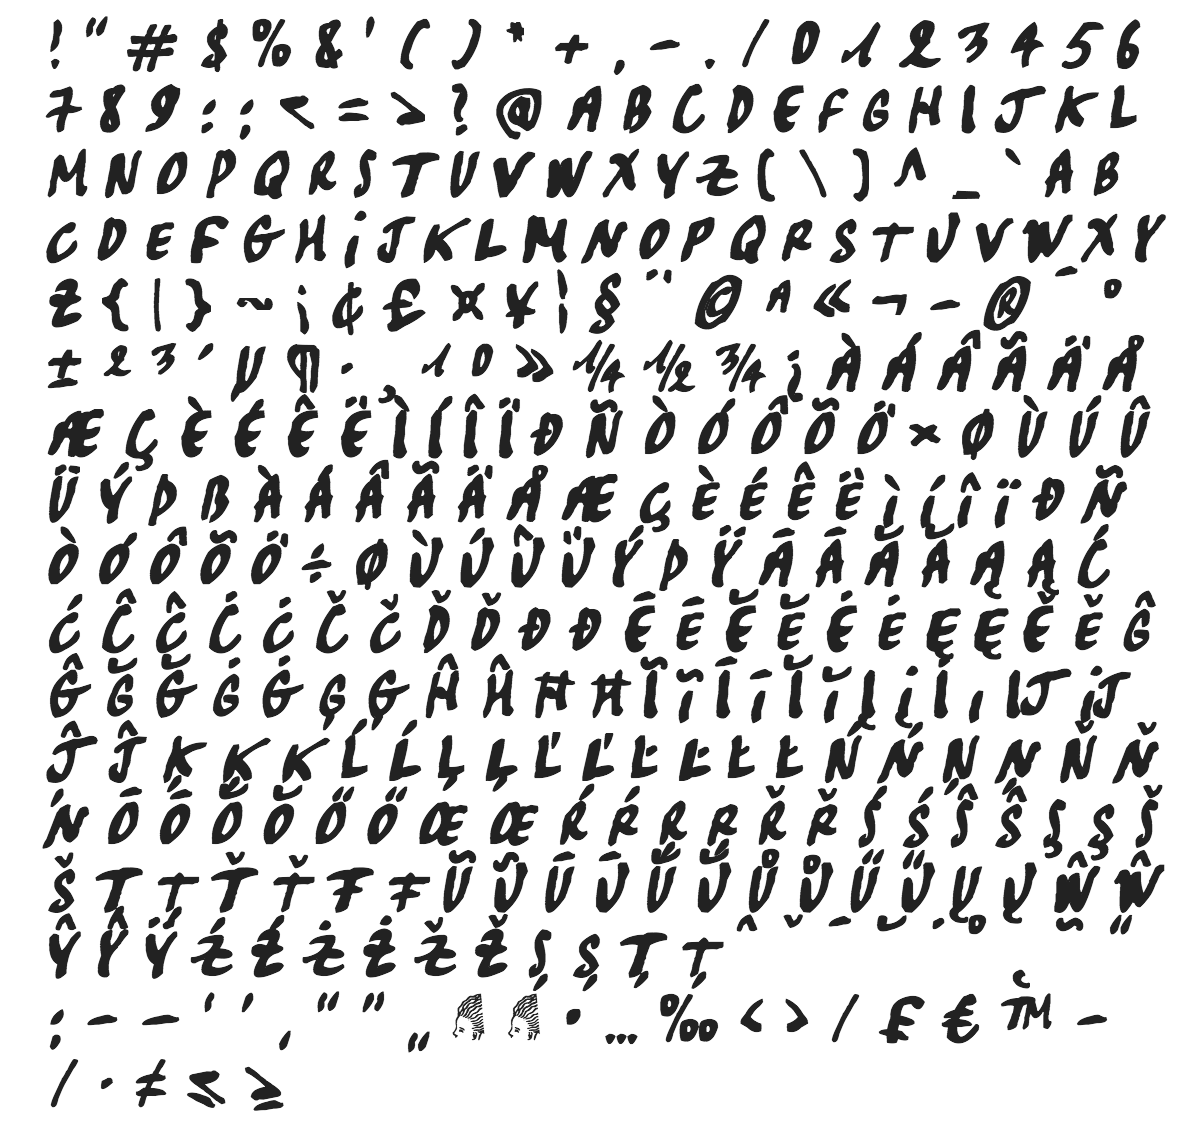 pascal font - complete character list